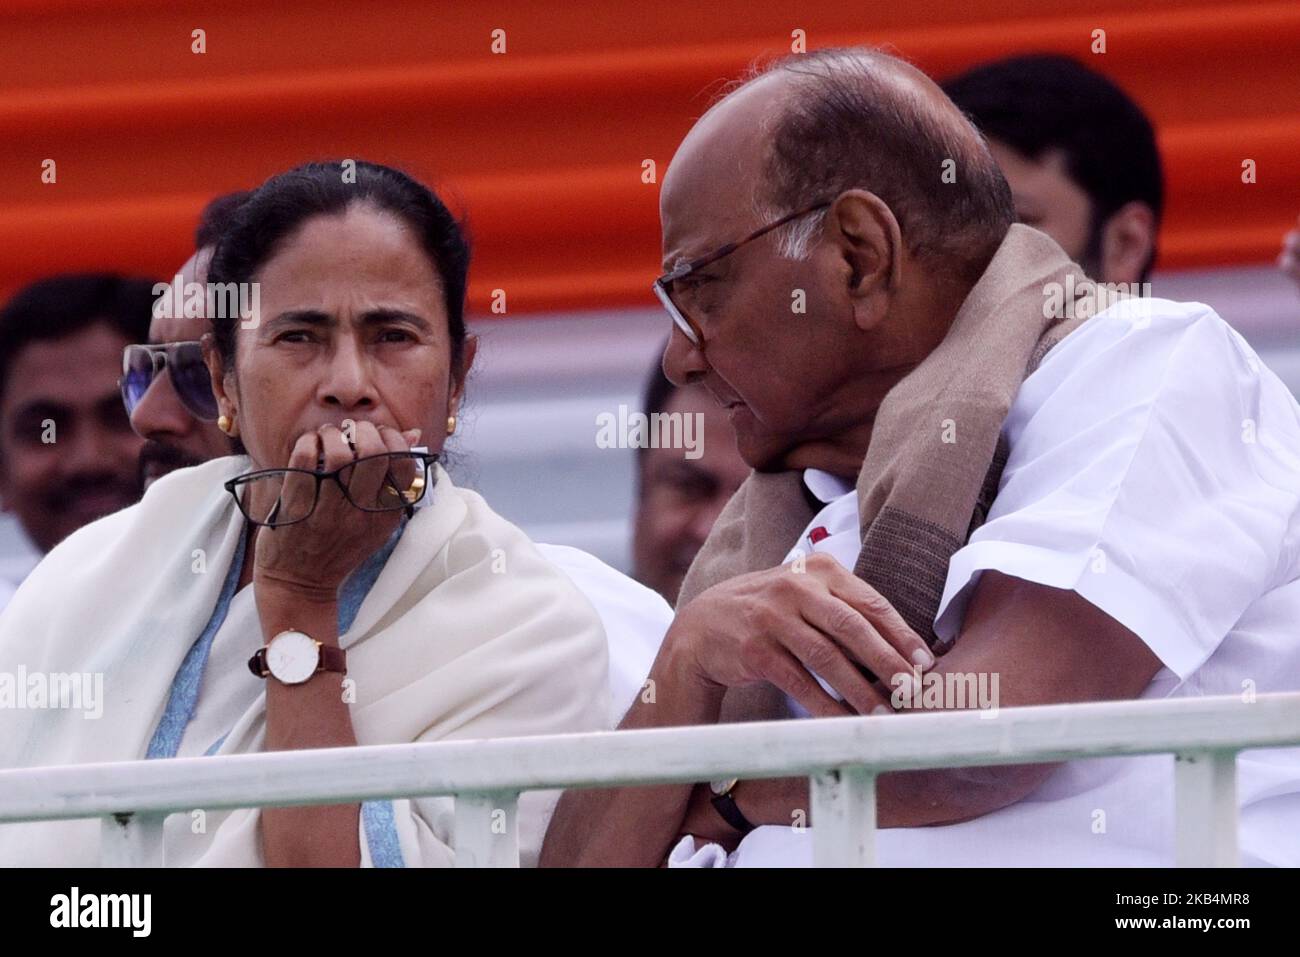 AITMC Chief and Bengal CM Mamata Banerjee and NCP chief Sharad Pawar during a rally attended by leaders from major Indian opposition parties in Kolkata, India, Saturday, Jan. 19, 2019. The rally has been attended by the leaders of twenty-two national and regional parties who oppose the ruling Bharatiya Janata Party (BJP) government. (Photo by Debajyoti Chakraborty/NurPhoto) Stock Photo